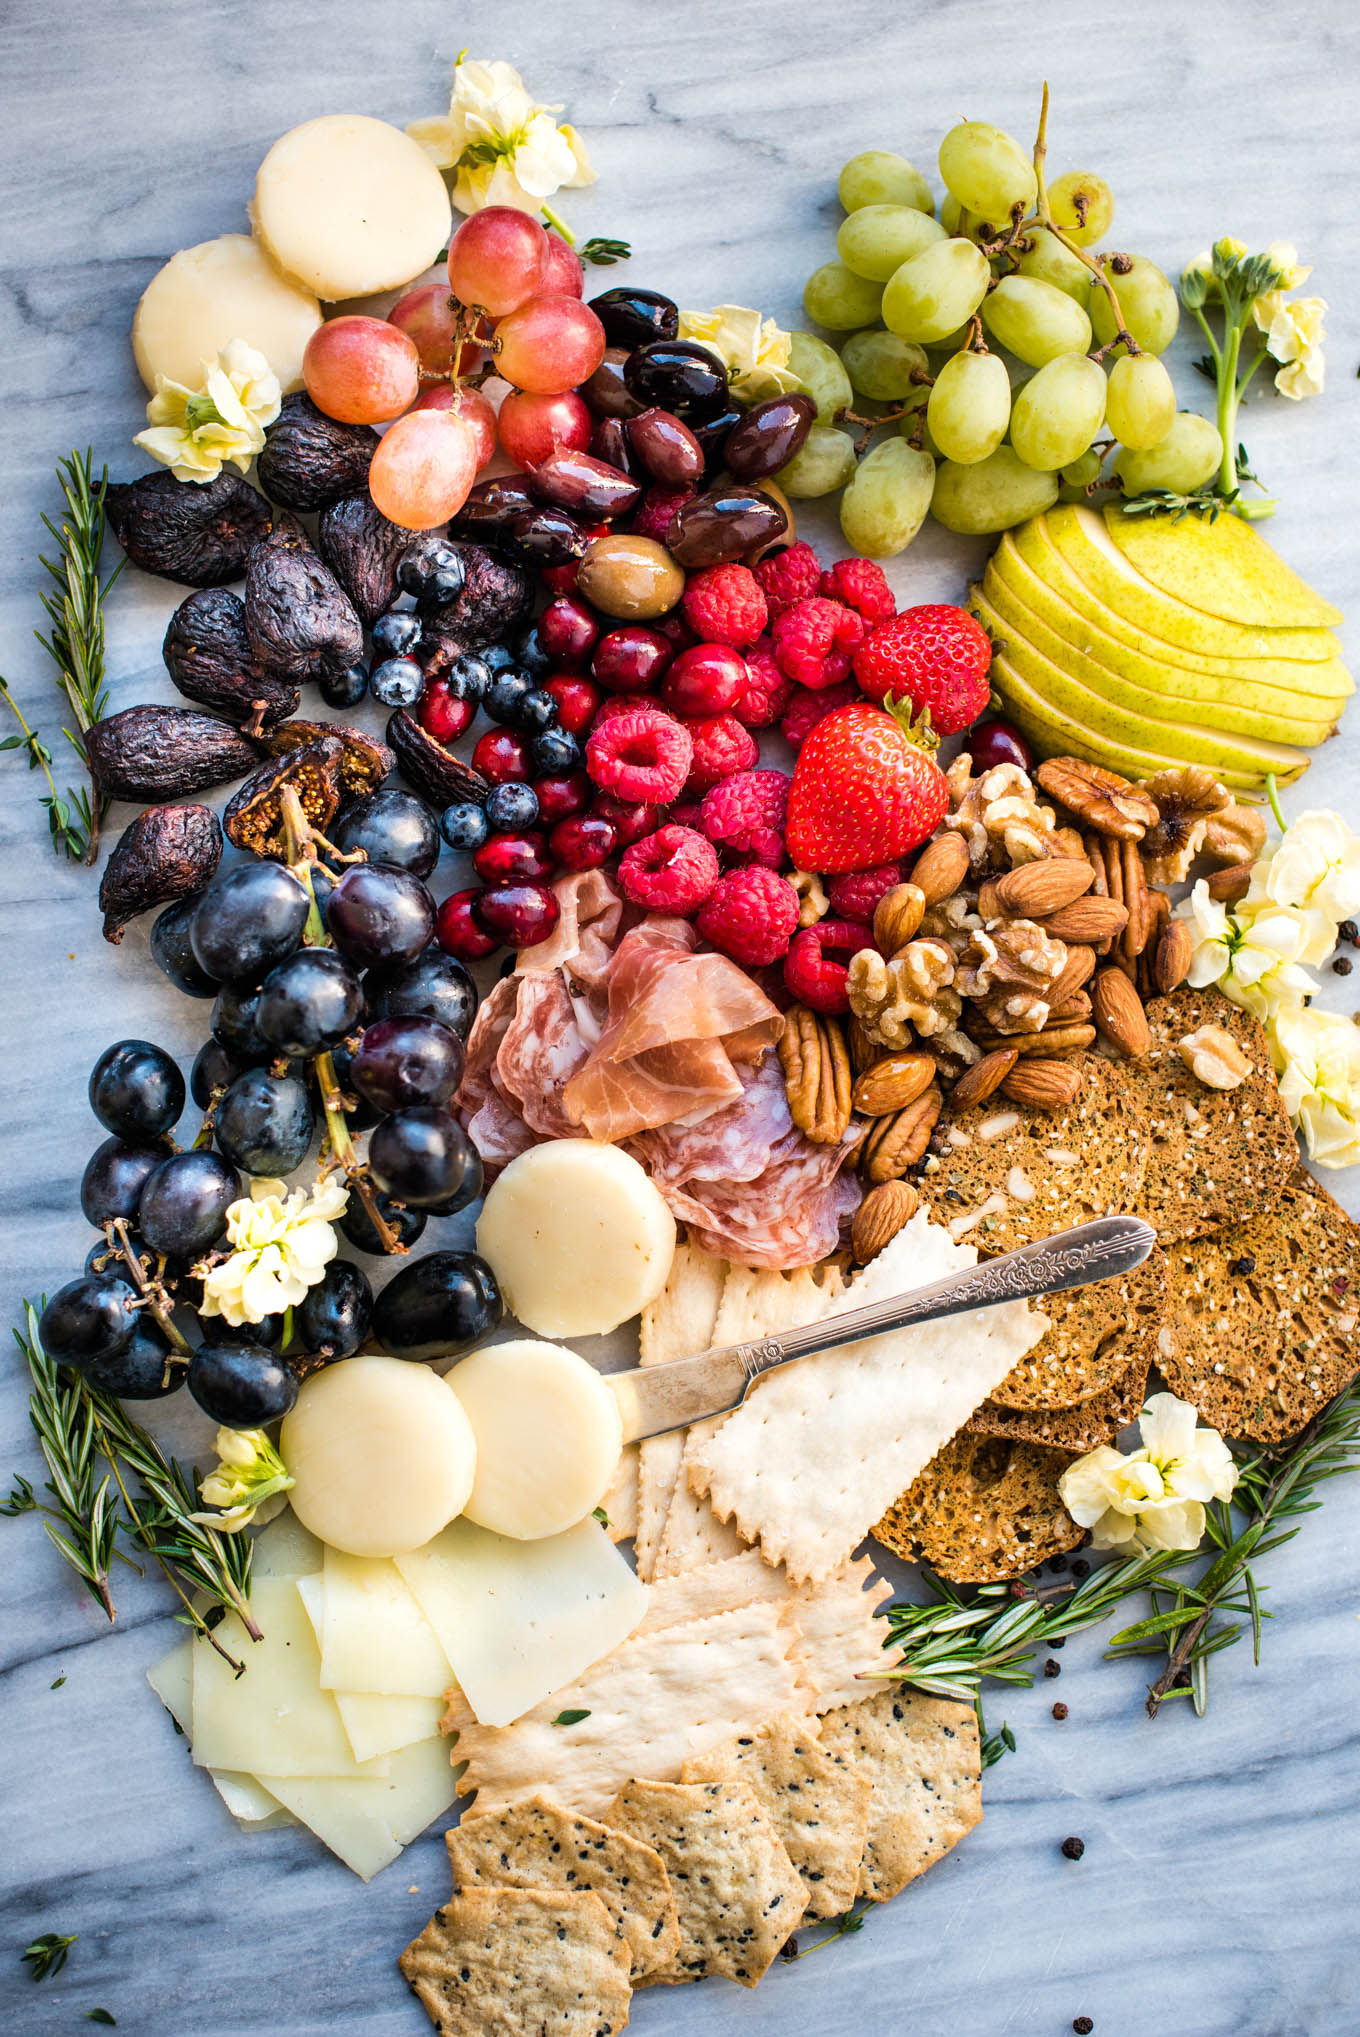 http://www.nutritiouseats.com/wp-content/uploads/2018/11/Easy-Charcuterie-Board.jpg